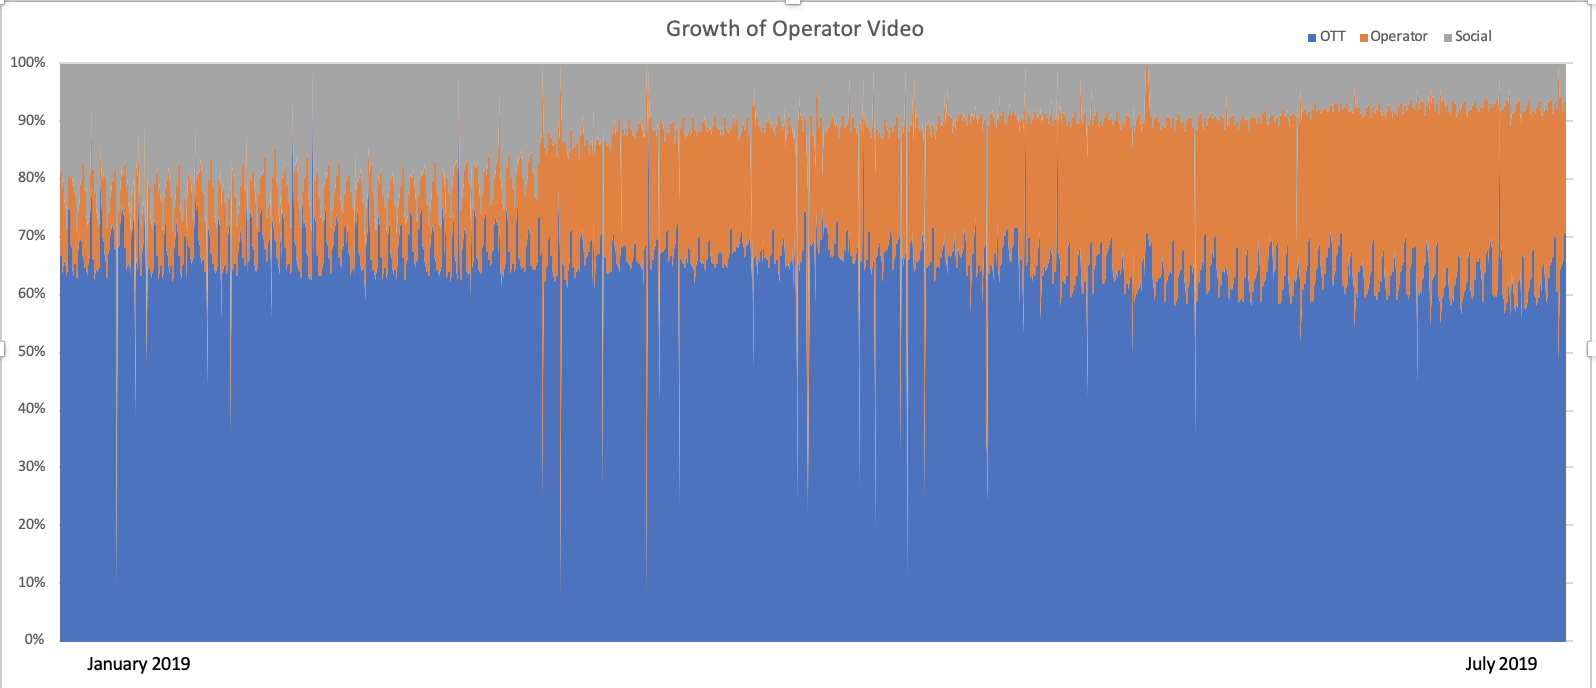 An image showing Video Operator growth